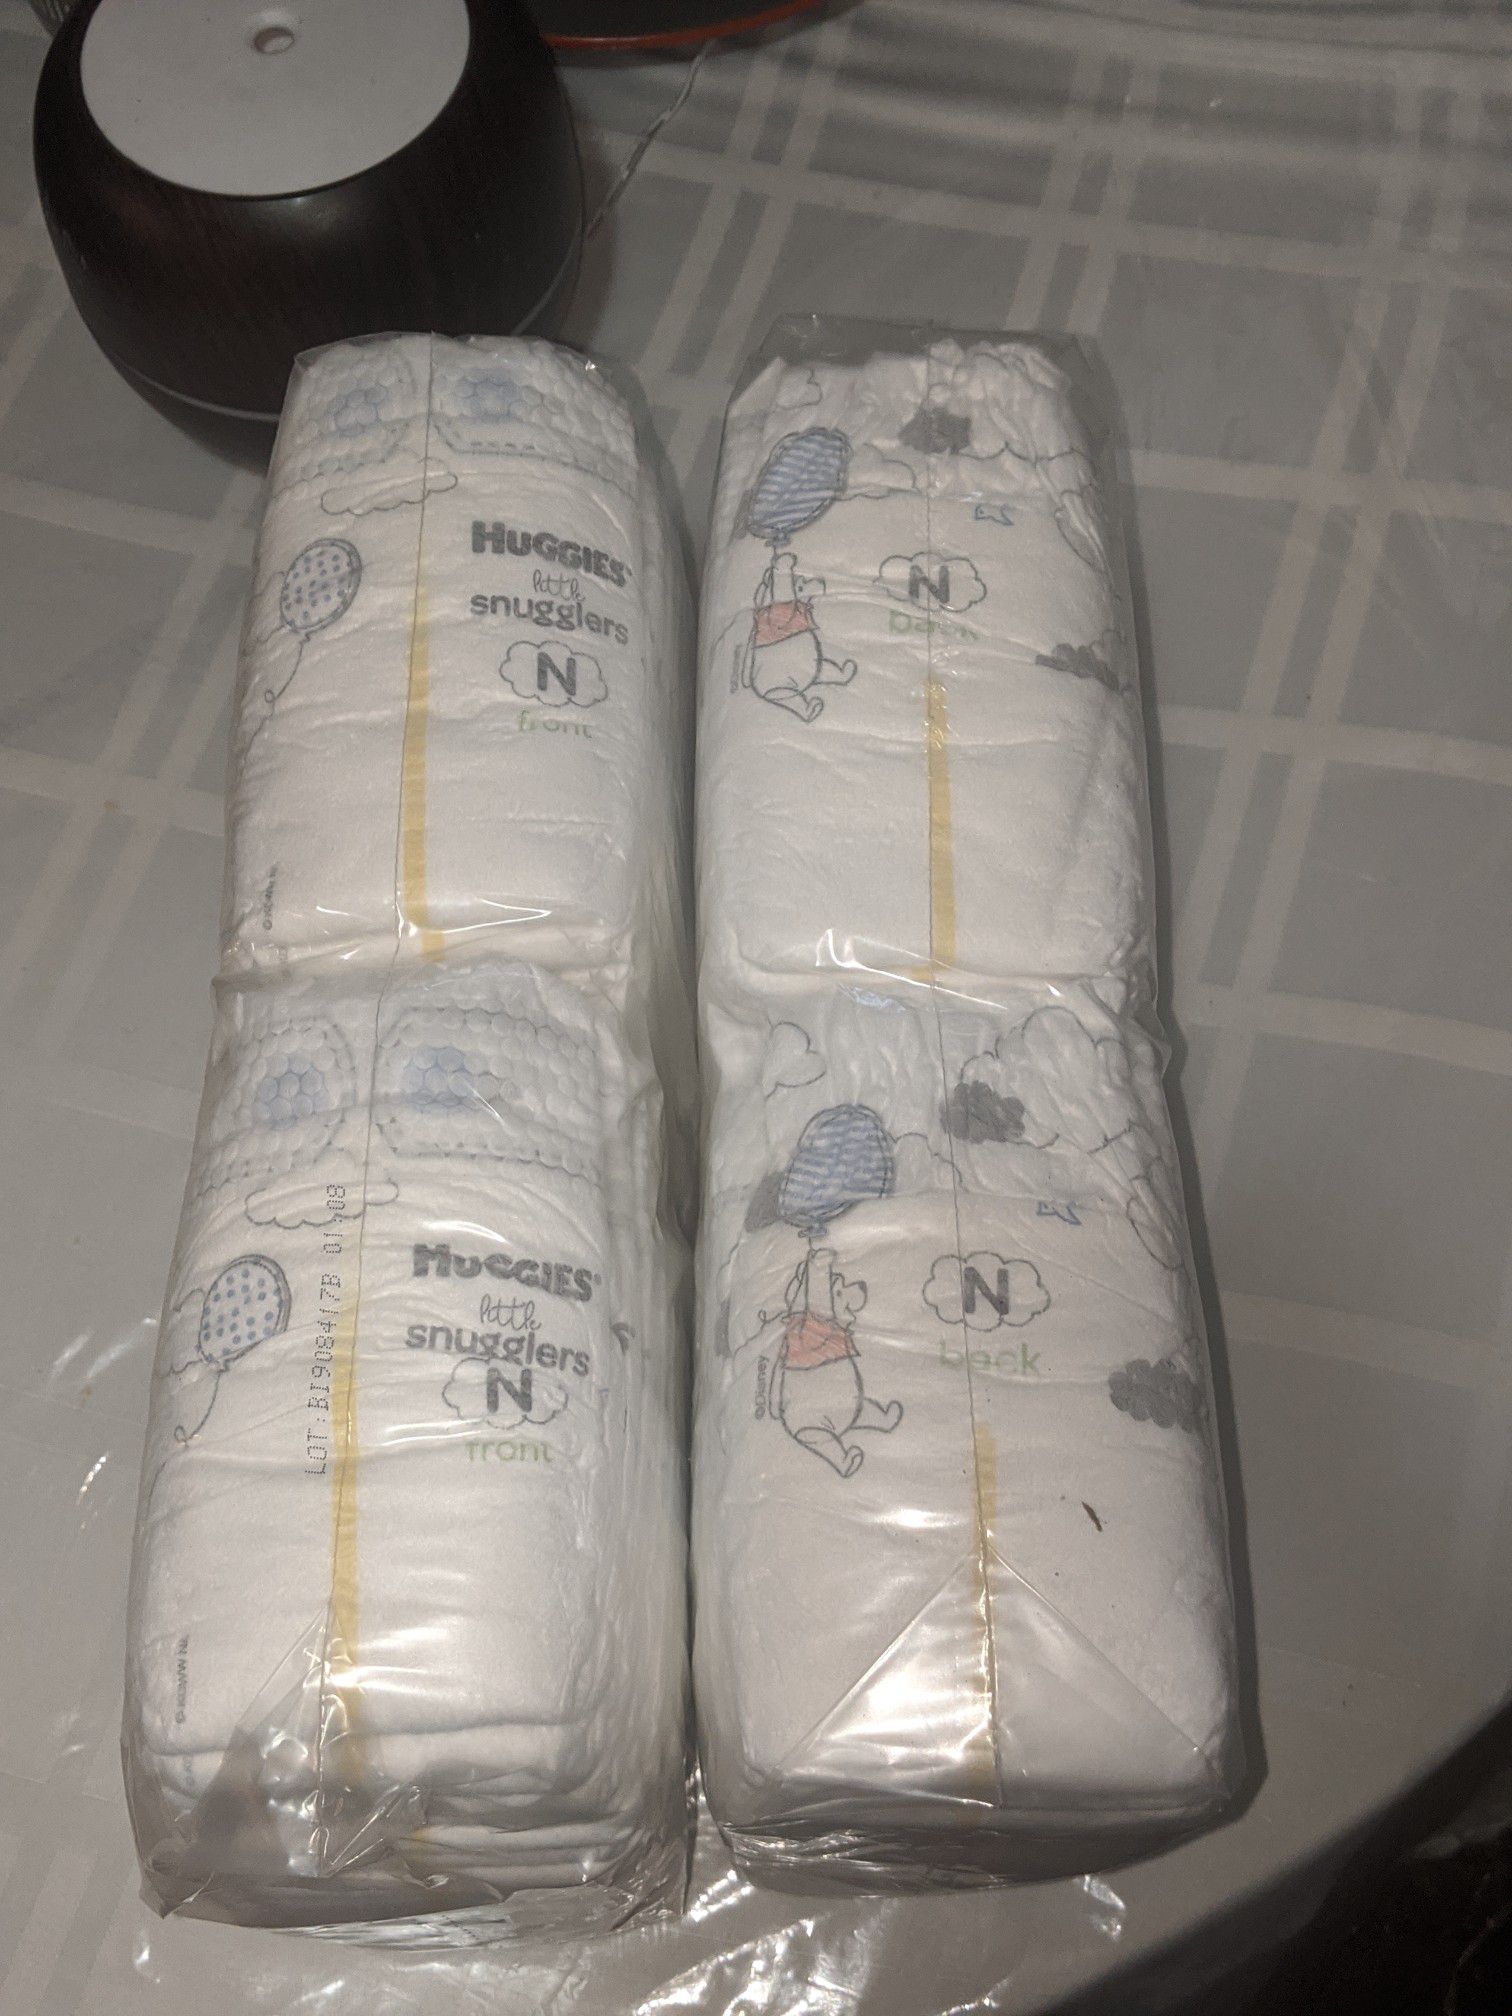 $10 Two 40x2=80 Newborn diapers for $10 dollars